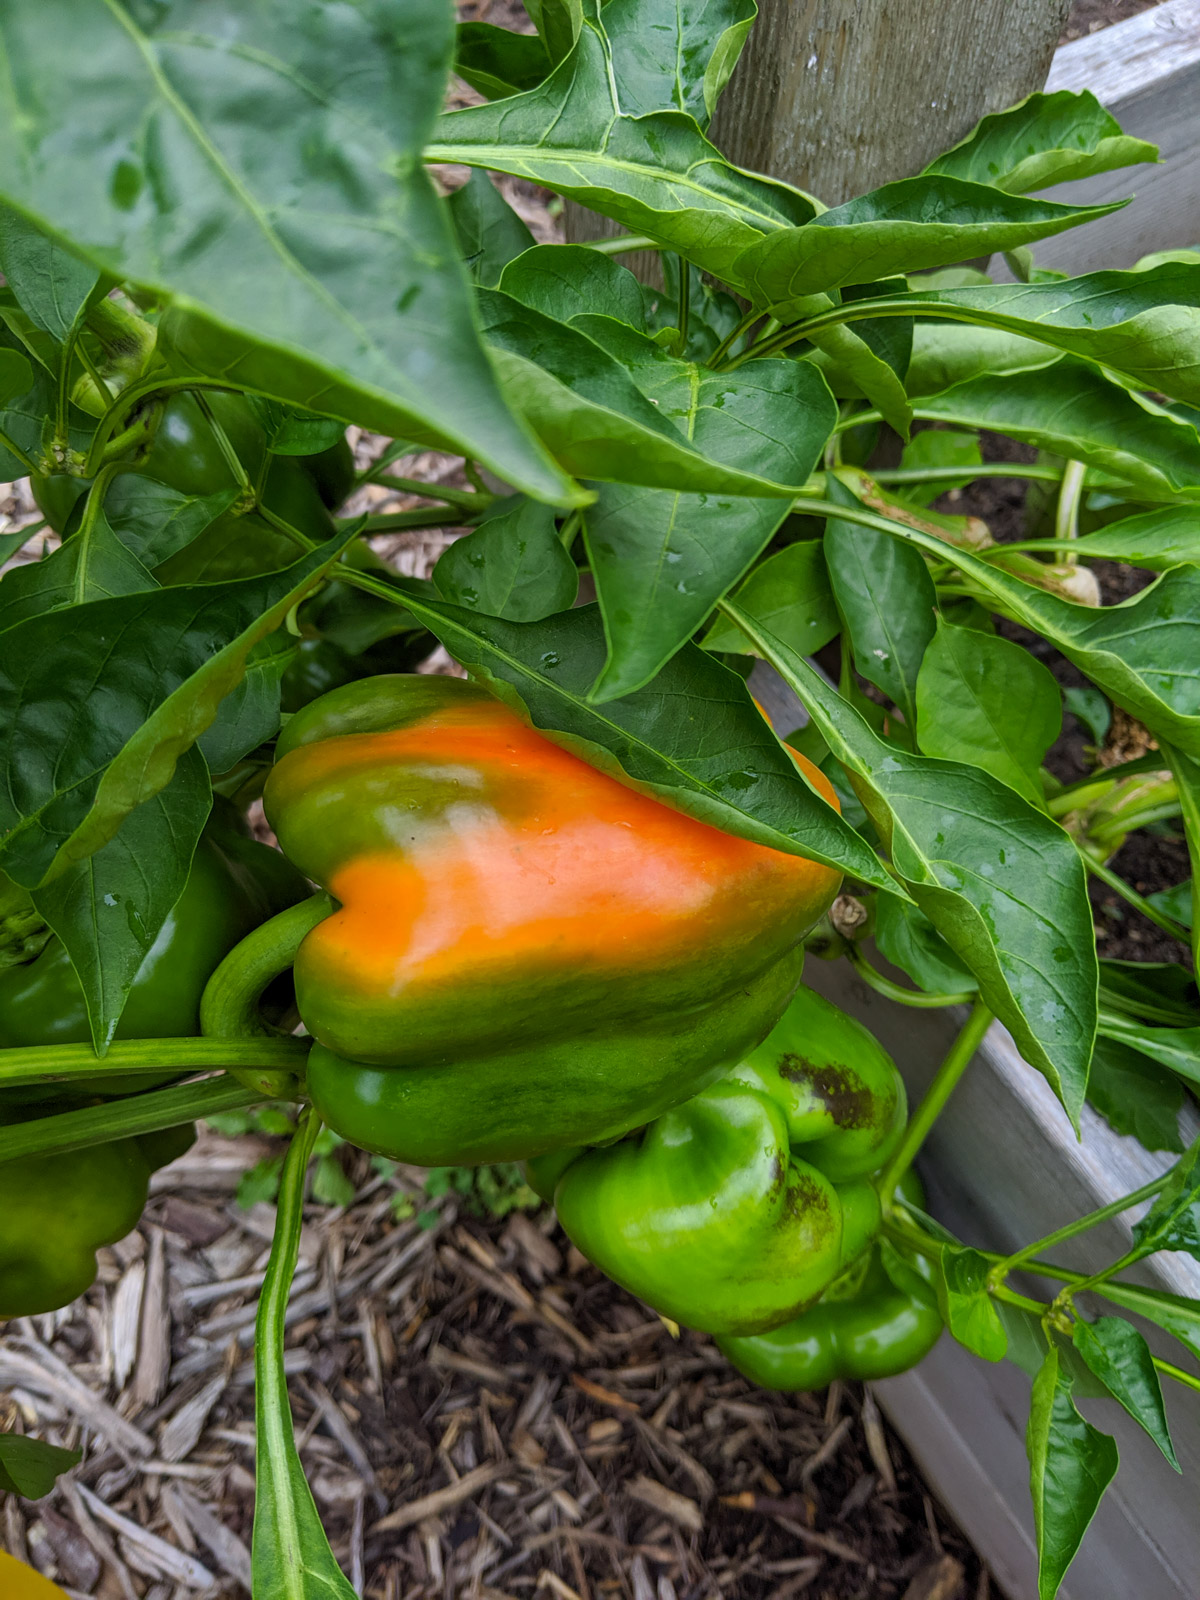 Bell peppers ripening from green to orange on the vine.